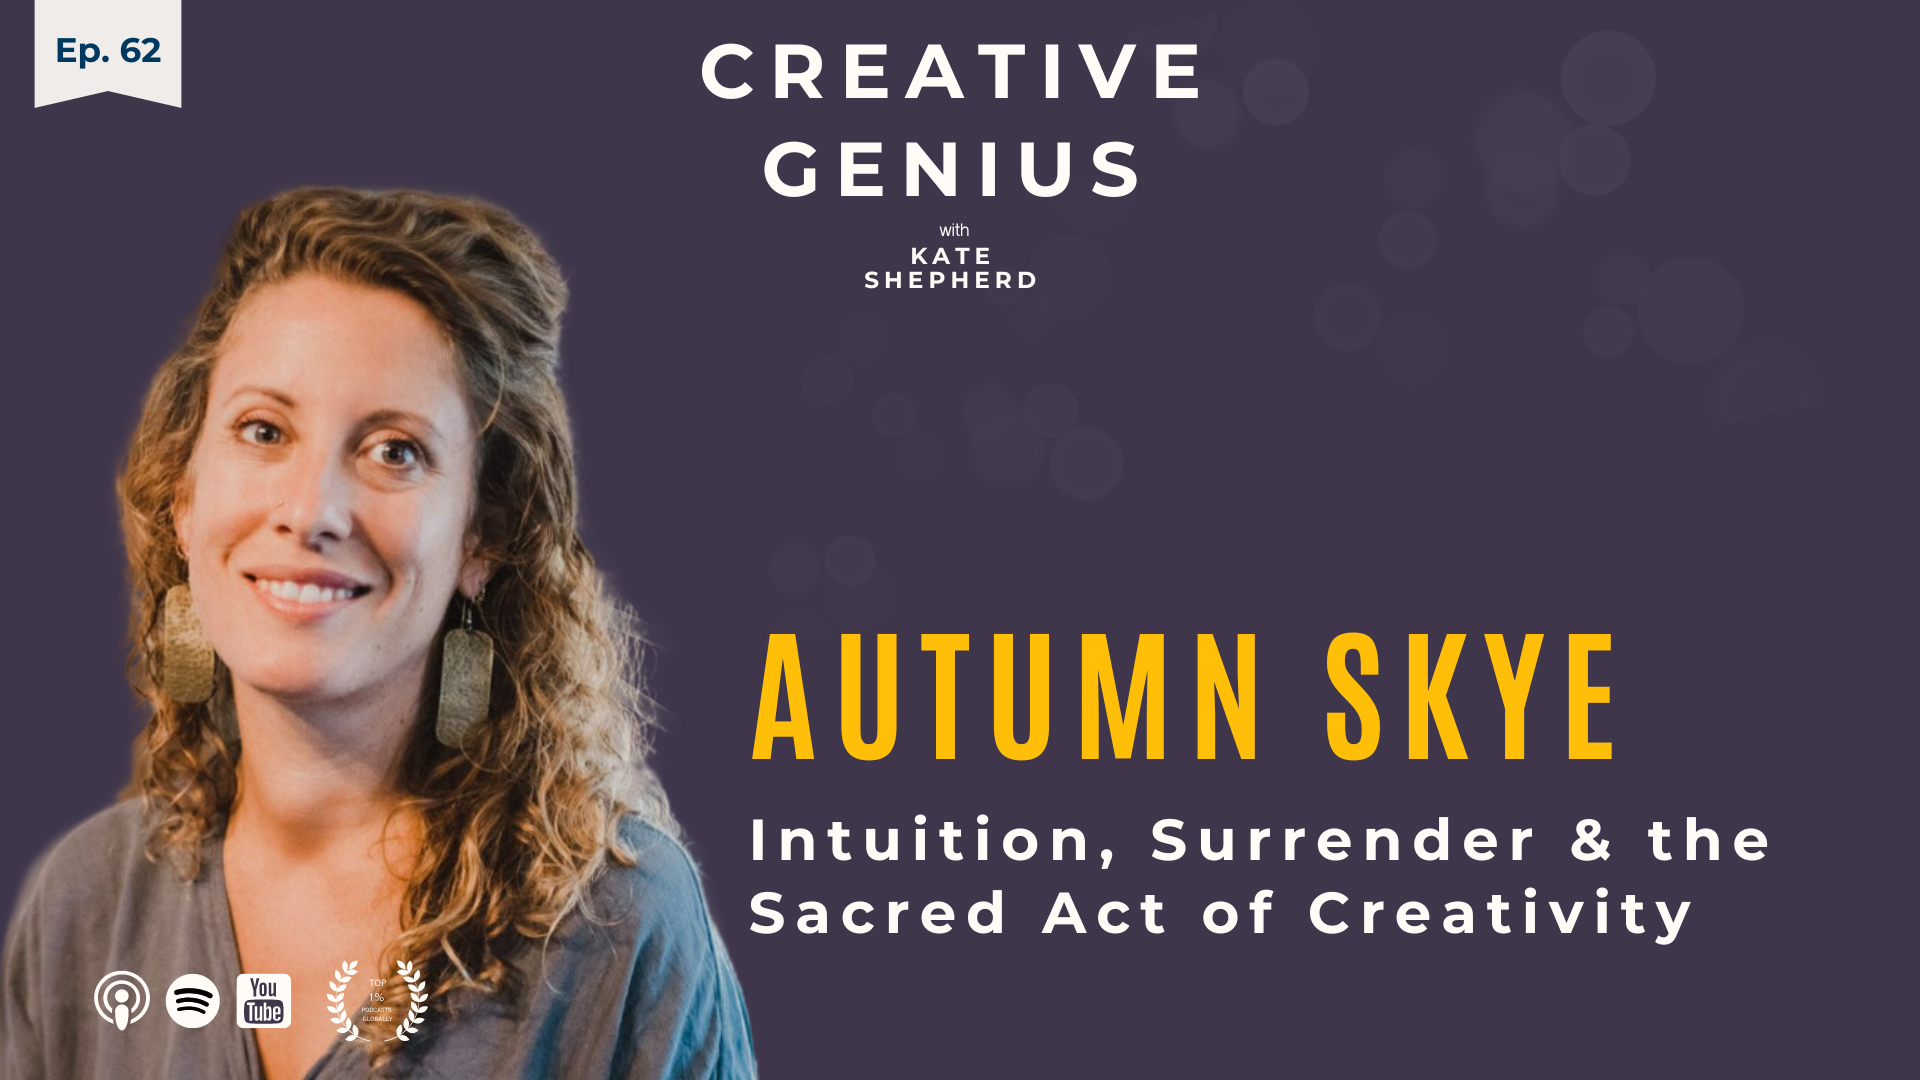 EP 62 - Autumn Skye (updated encore presentation) Intuition, Surrender & the Sacred Act of Creativity